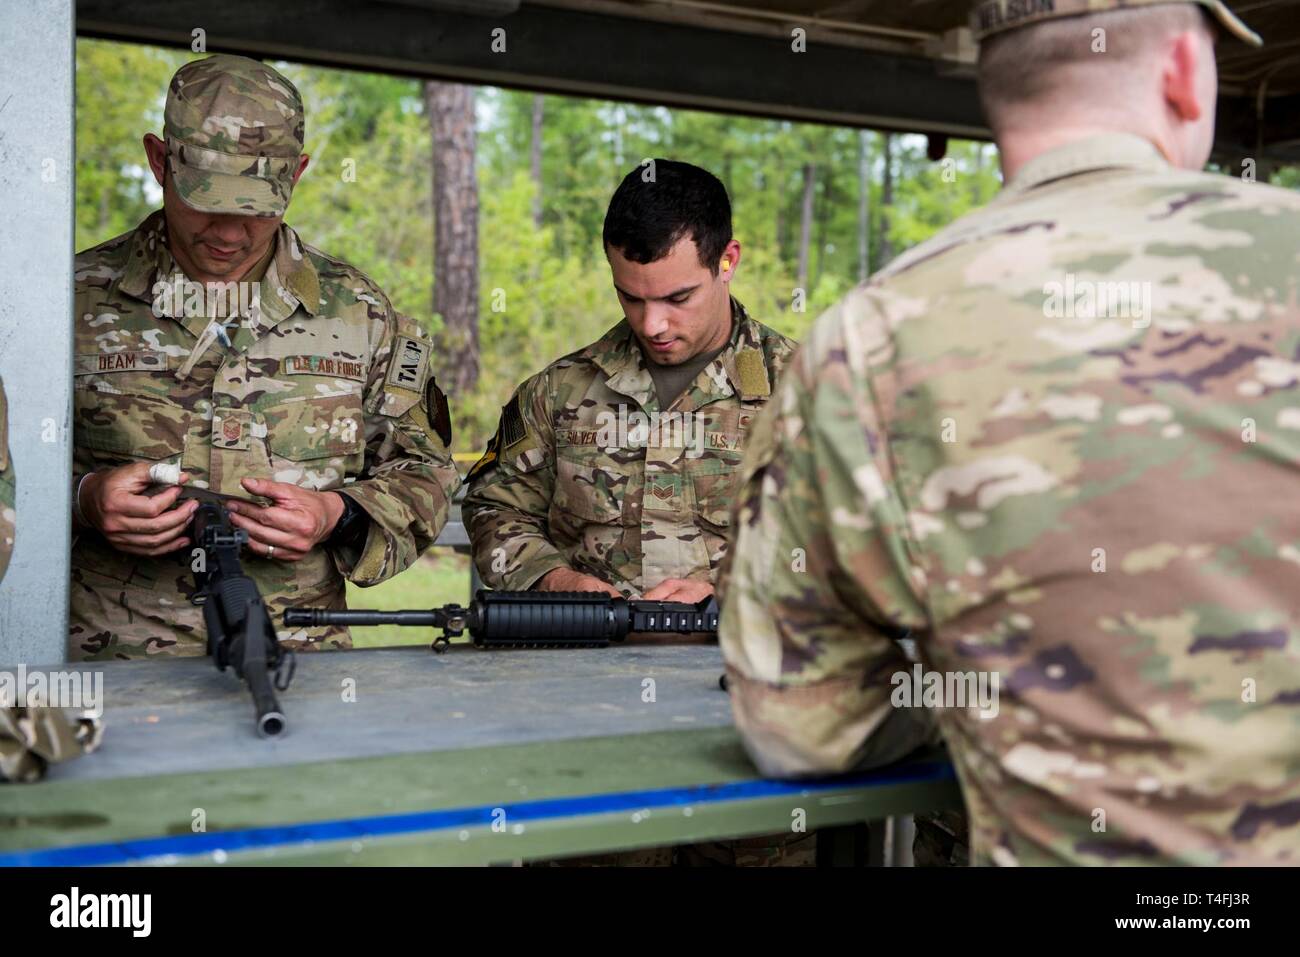 U S Air Force Master Sgt Sean Deam Charlie Flight Chief And Staff Sgt Marcos Silverio Mark Their Weapons In Preparation For The Best Ranger Competition April 9 2019 At Fort Benning Georgia